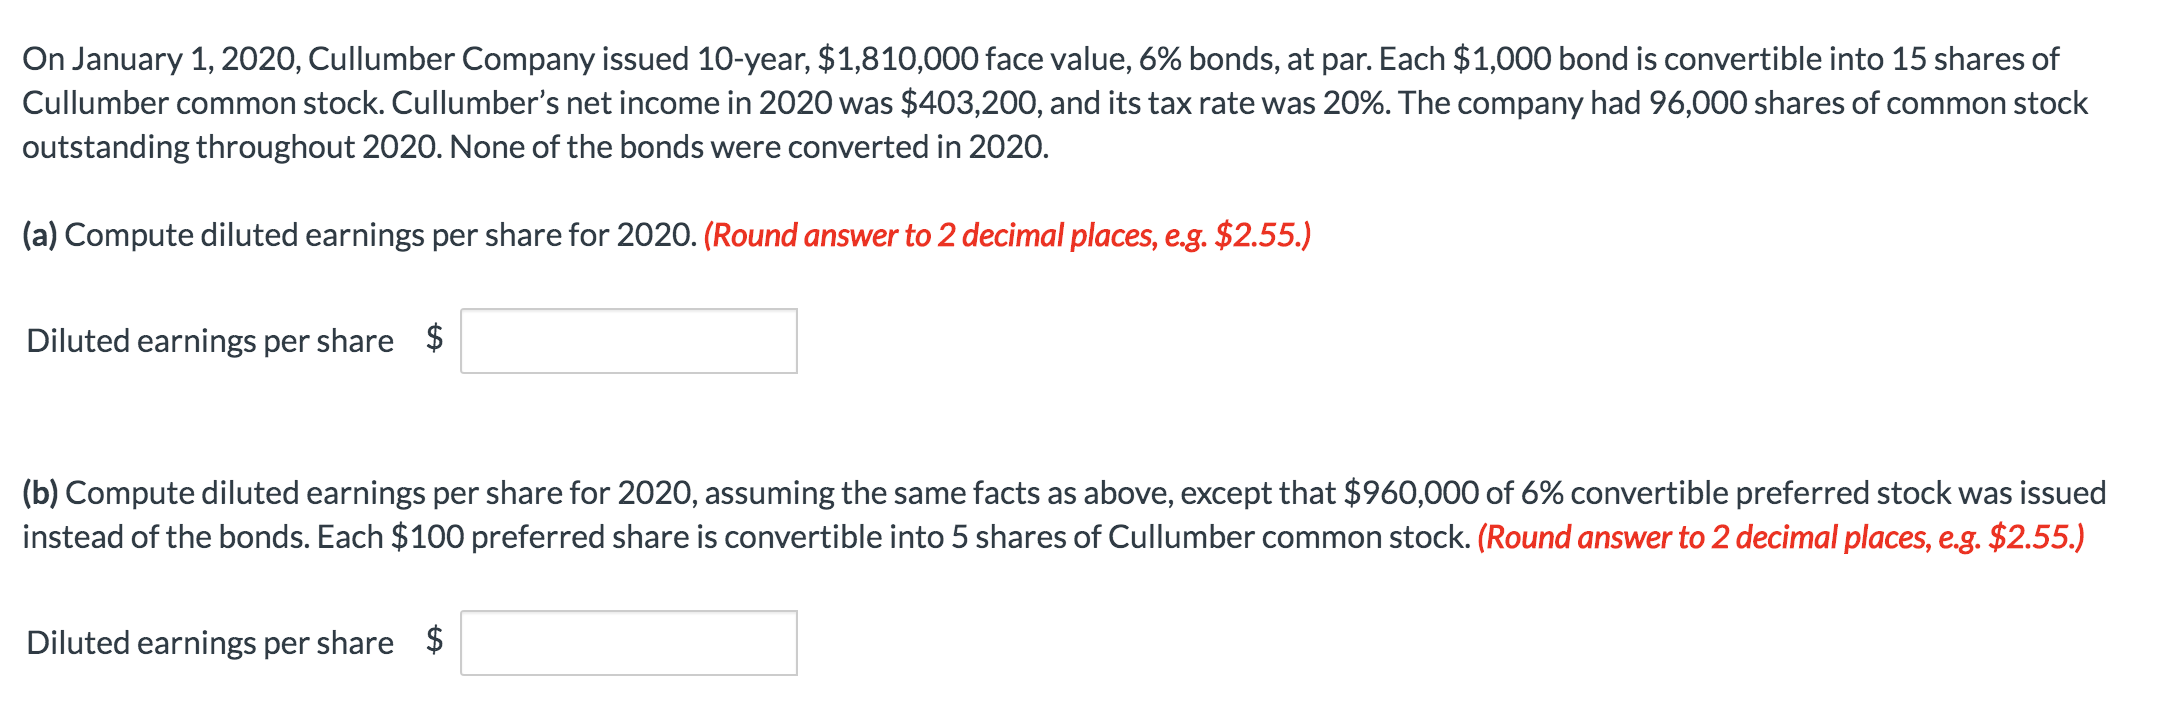 On january 1, 2020, cullumber company issued 10-year, $1,810,000 face value, 6% bonds, at par. each $1,000 bond is convertibl